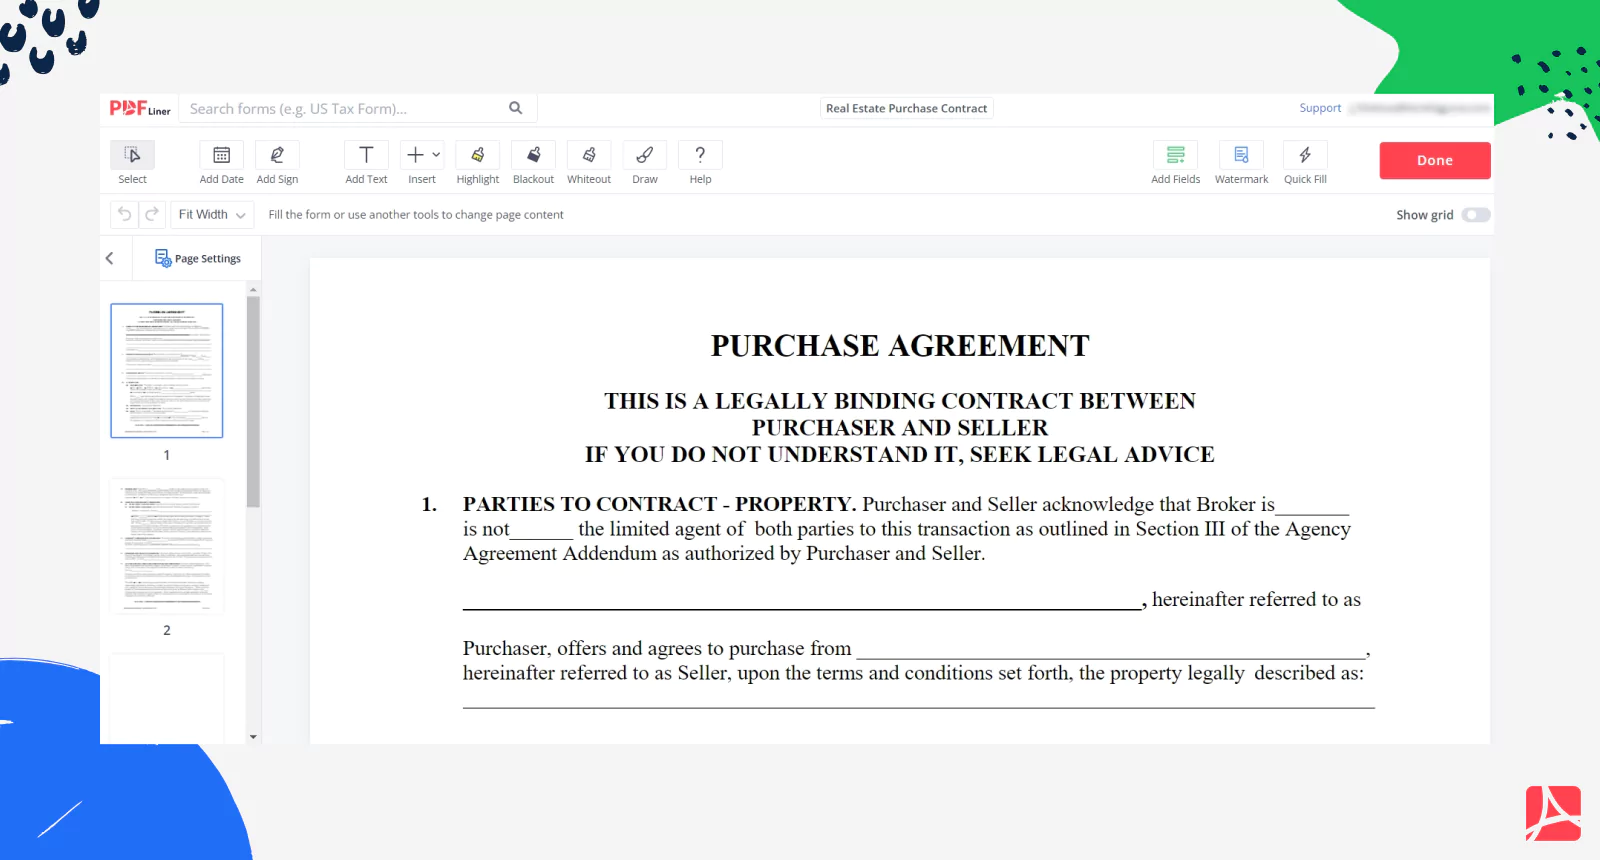 Real Estate Purchase Contract on PDFLiner